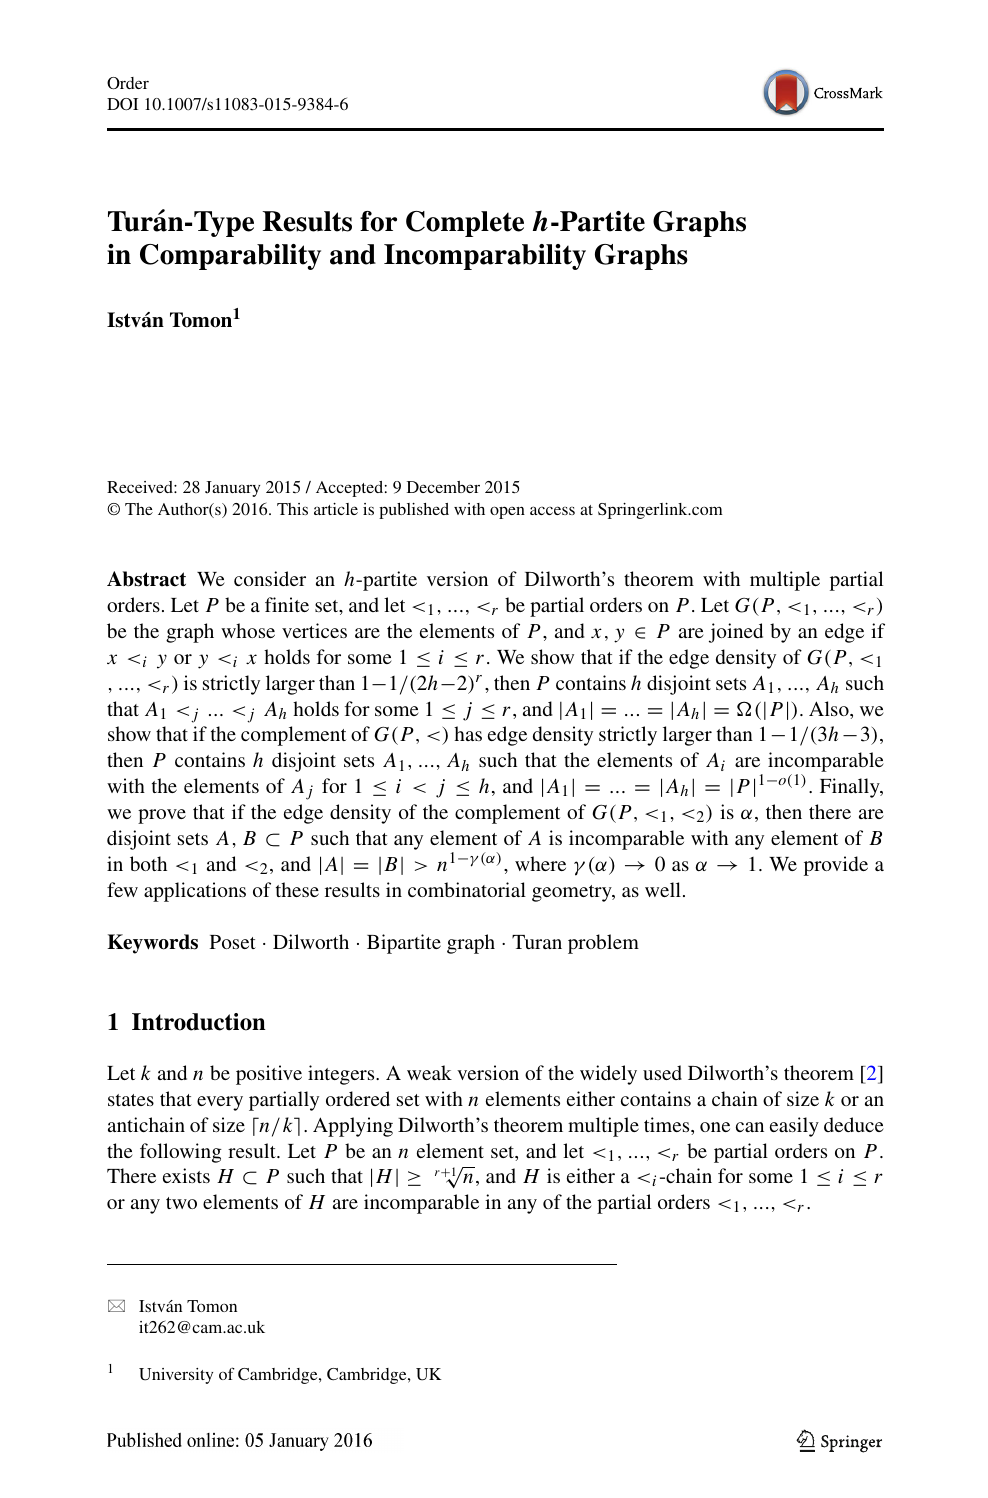 Turan Type Results For Complete H Partite Graphs In Comparability And Incomparability Graphs Topic Of Research Paper In Mathematics Download Scholarly Article Pdf And Read For Free On Cyberleninka Open Science Hub